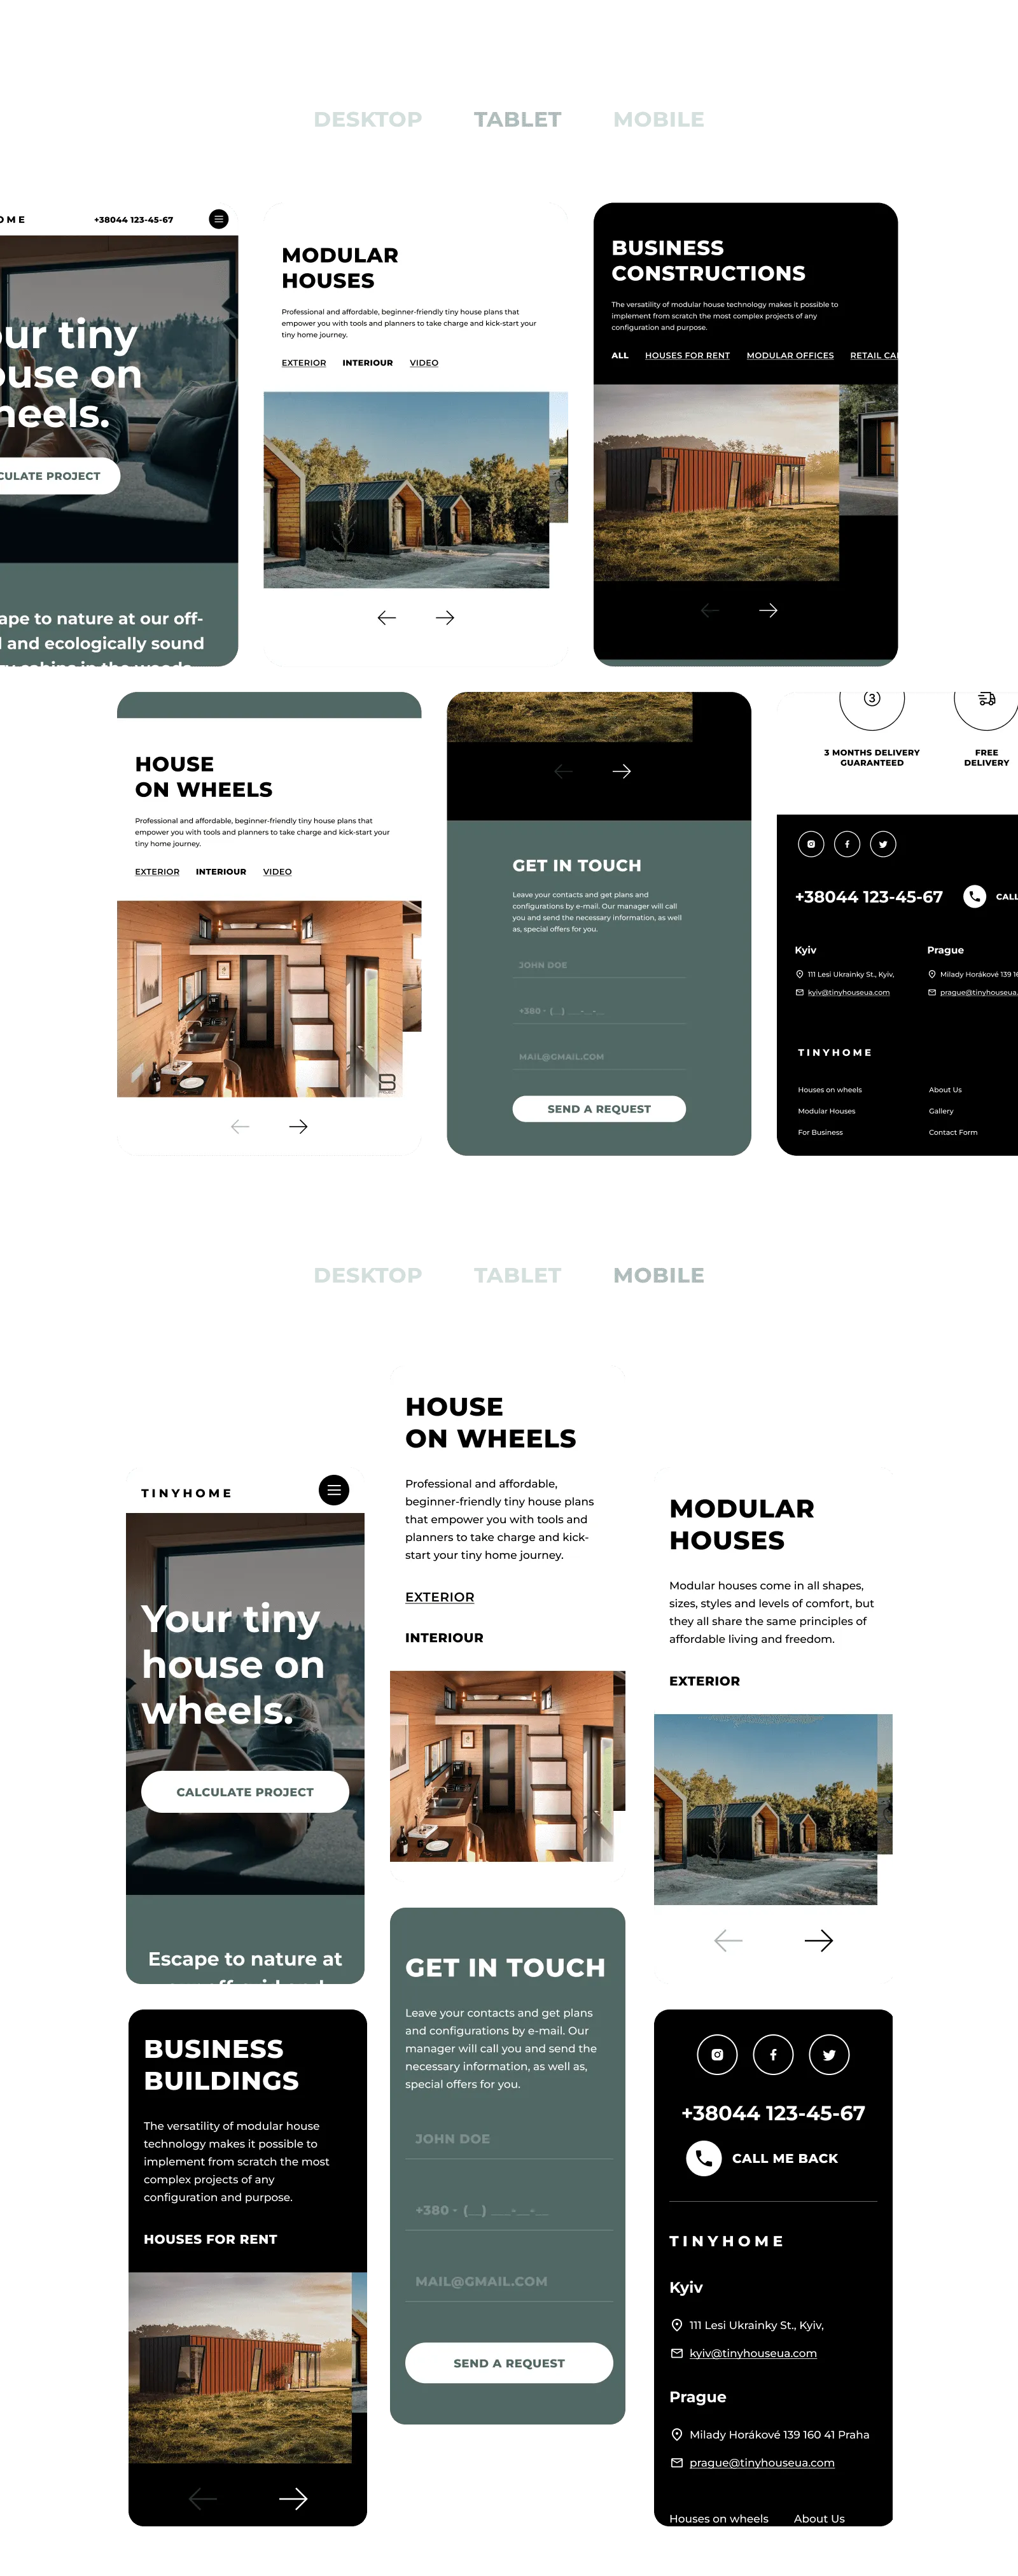 Mobile and tablet layouts for Tiny Home 